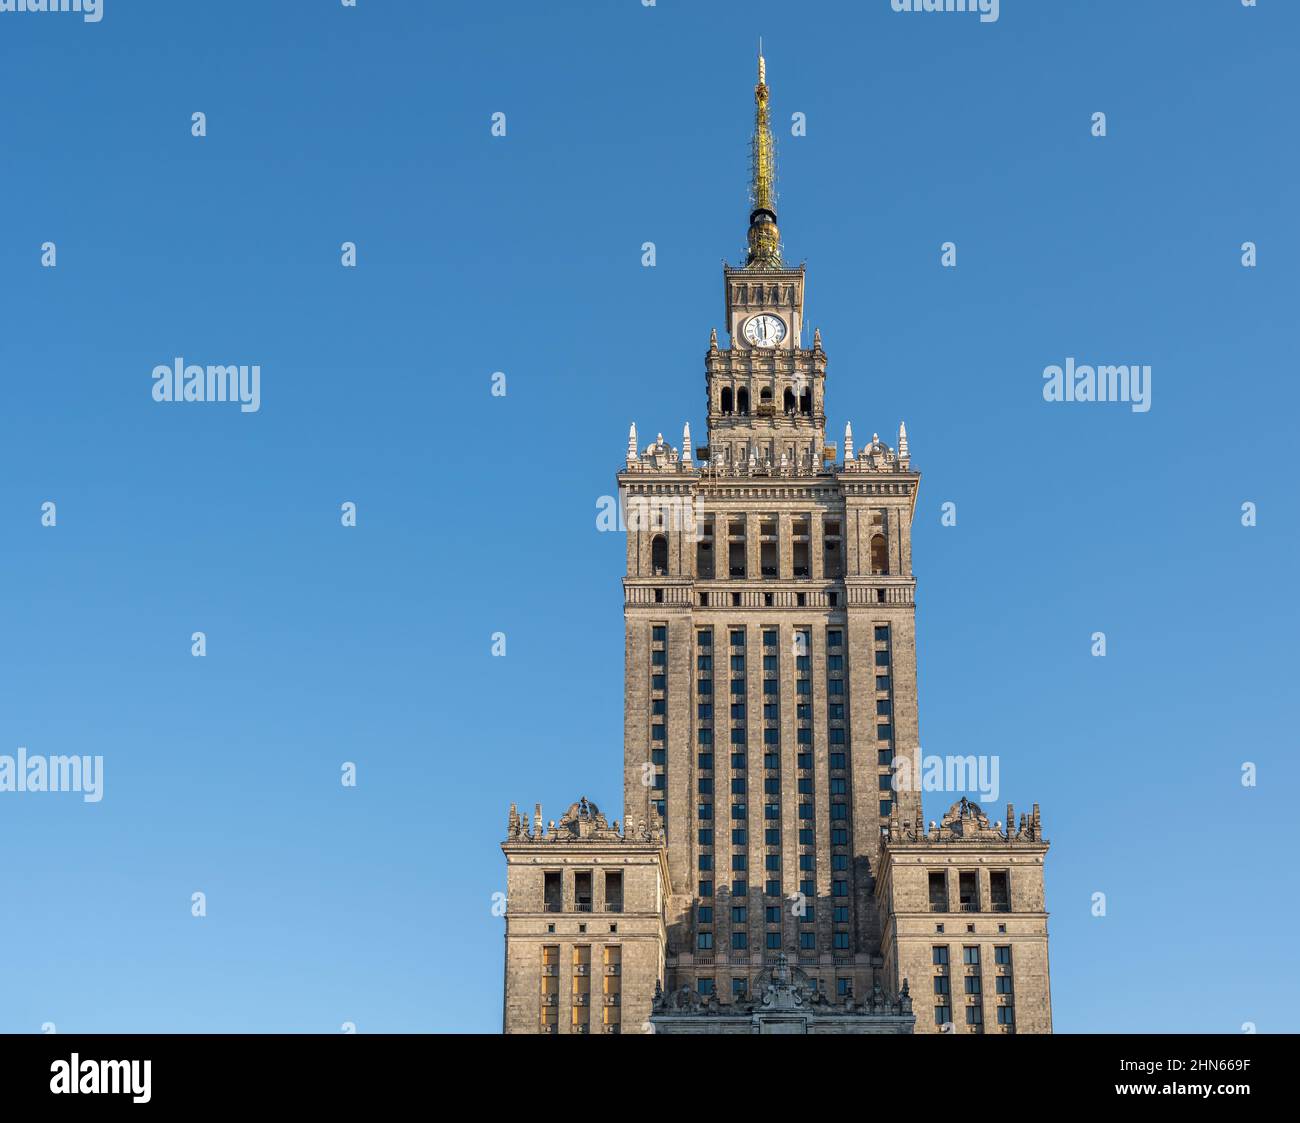 Palace of Culture and Science - Warsaw, Poland Stock Photo